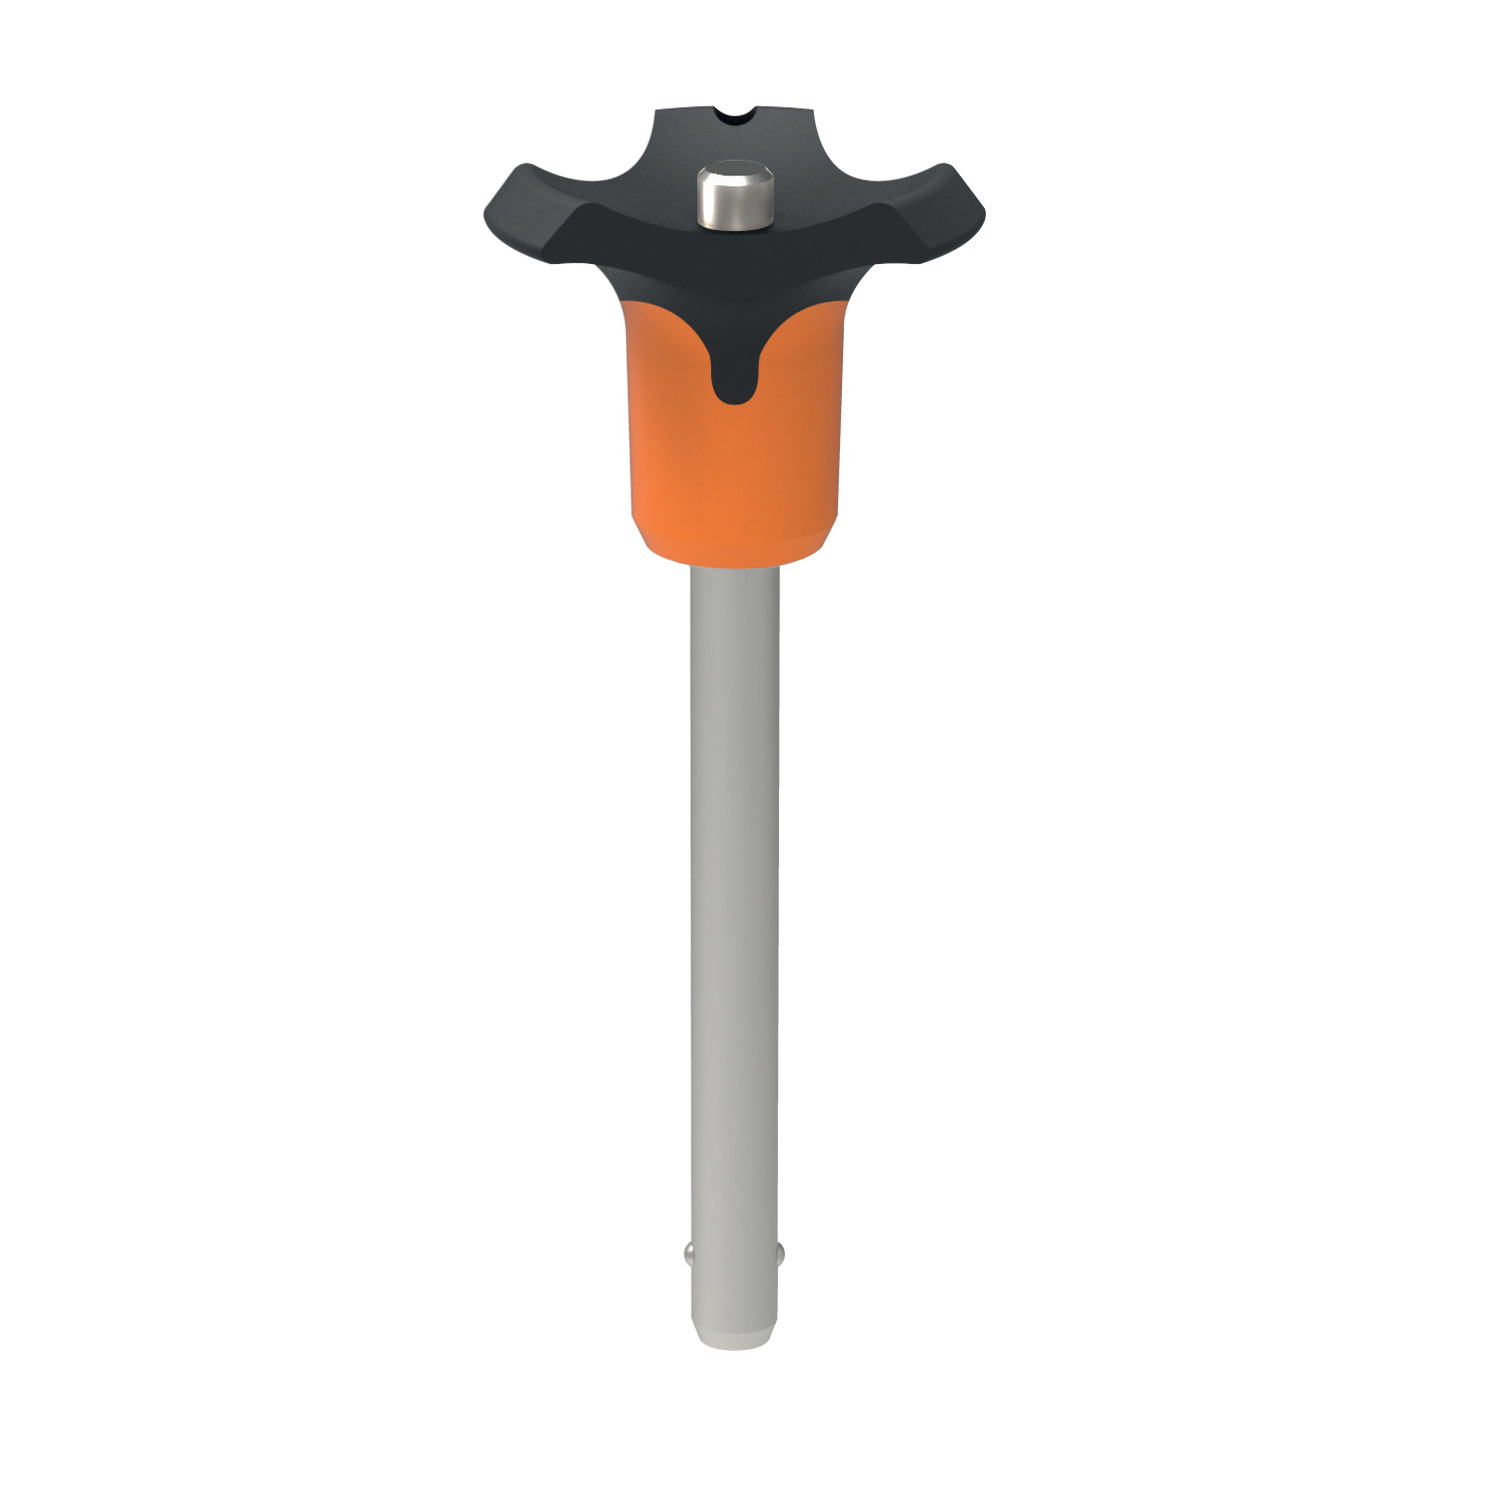 Ball Lock Pins - Single Acting - Orange Plastic Handle Single Acting Plastic Handle Ball Lock Pins in four different colours (orange, bleu, grey and black) to co-ordinate with your required application colour scheme. For repeated connection of parts, with high sheer forces.